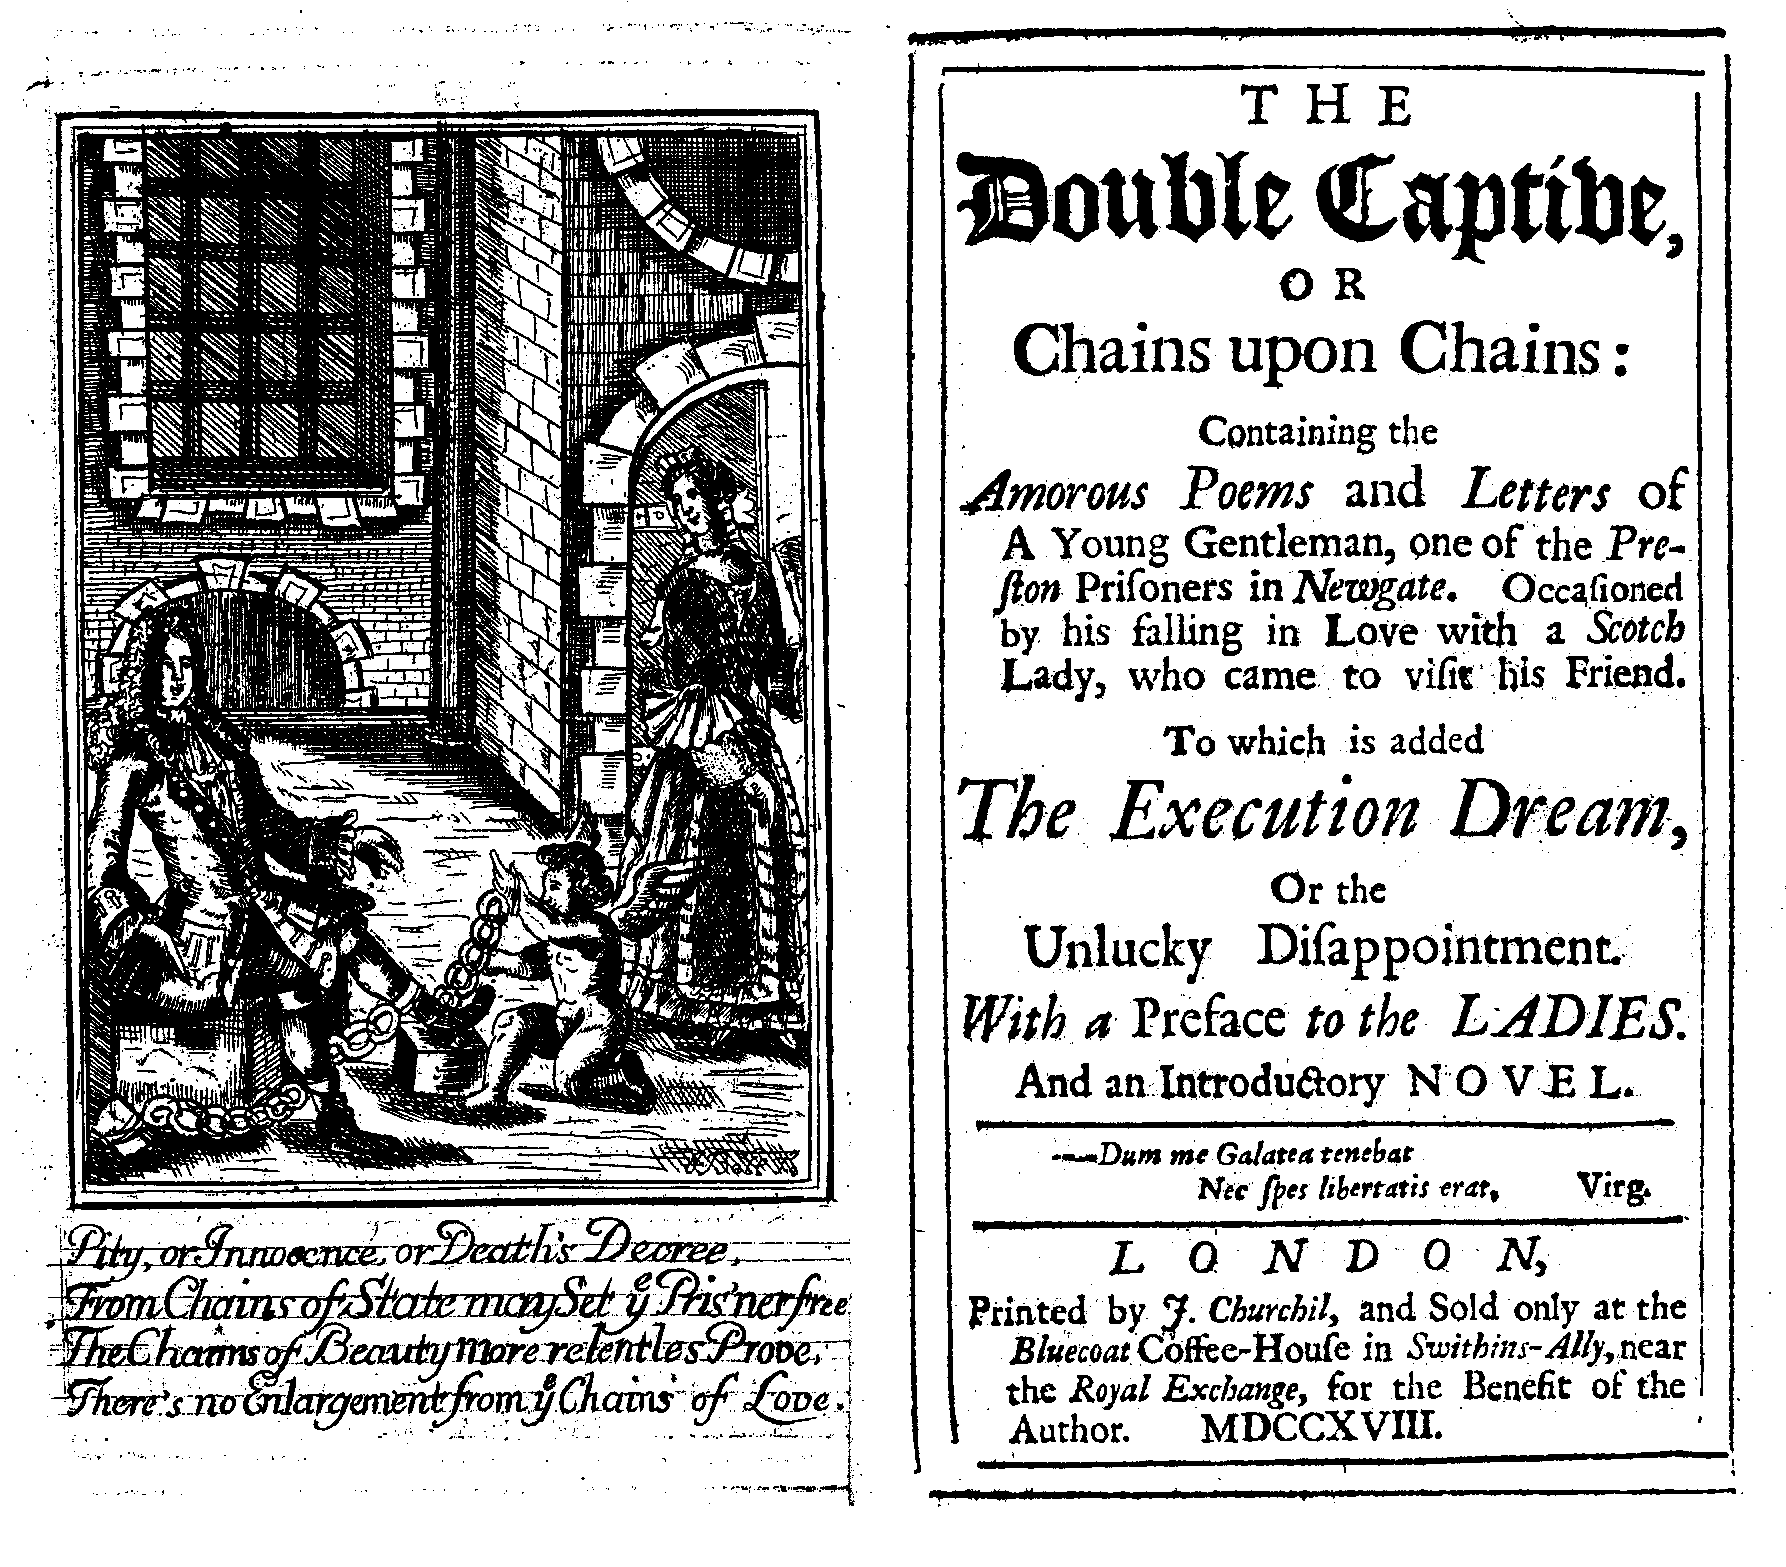 A Young Gentleman, one of the Preston Prisoners in Newgate, The Double Captive, or Chains upon Chains (London, printed by J. Churchill, sold only at the Bluecoat Coffee-house for the Benefit of the Author, 1718).